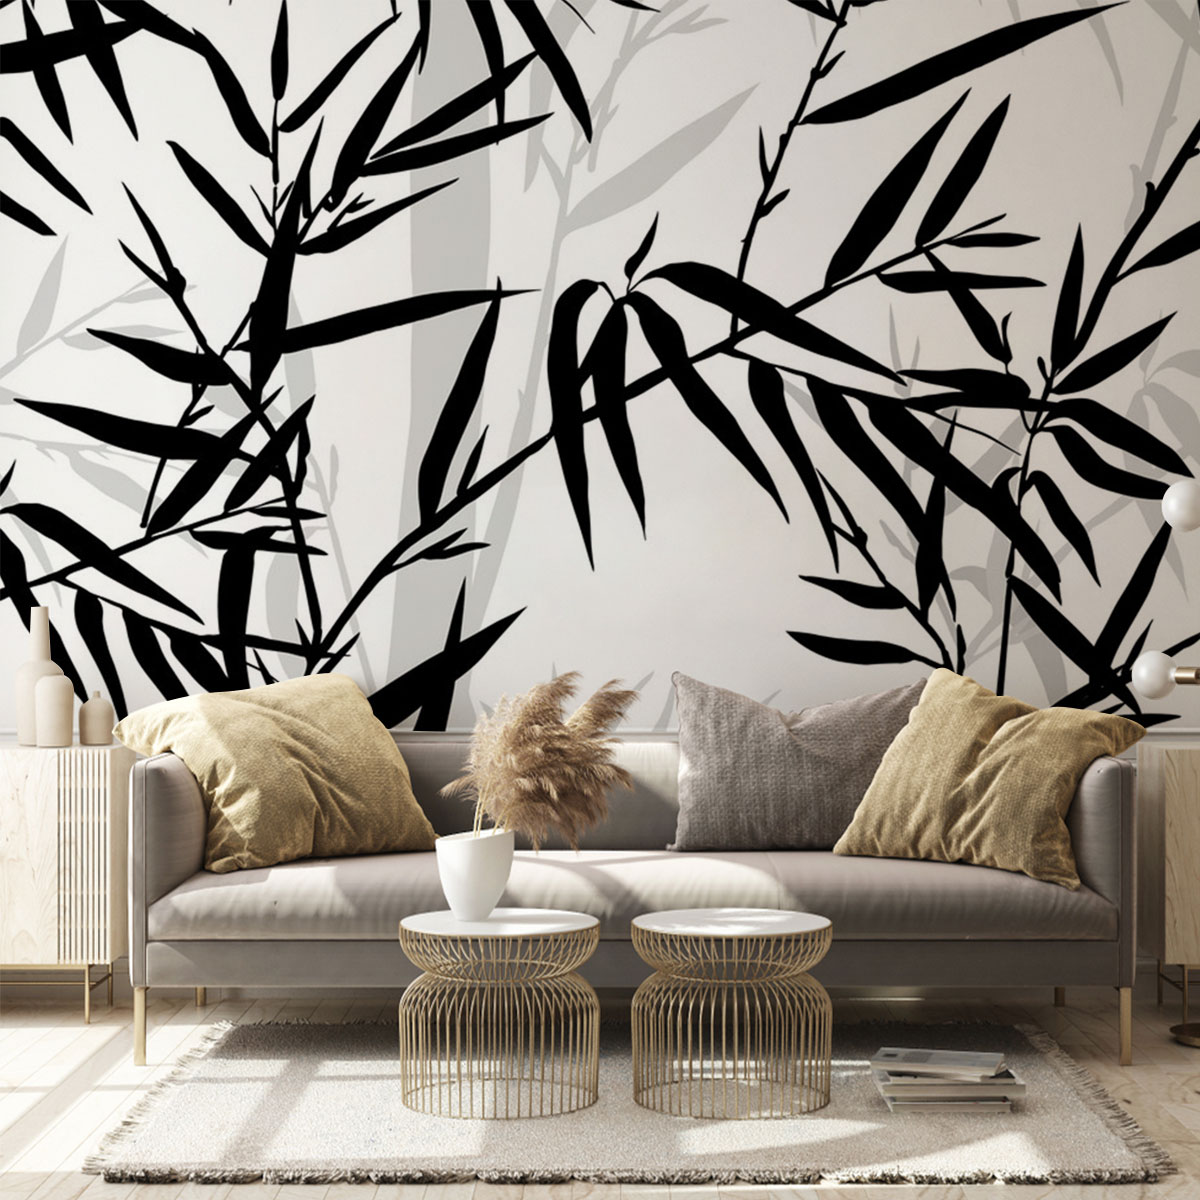 Black And White Bamboo Leaves Wall Mural